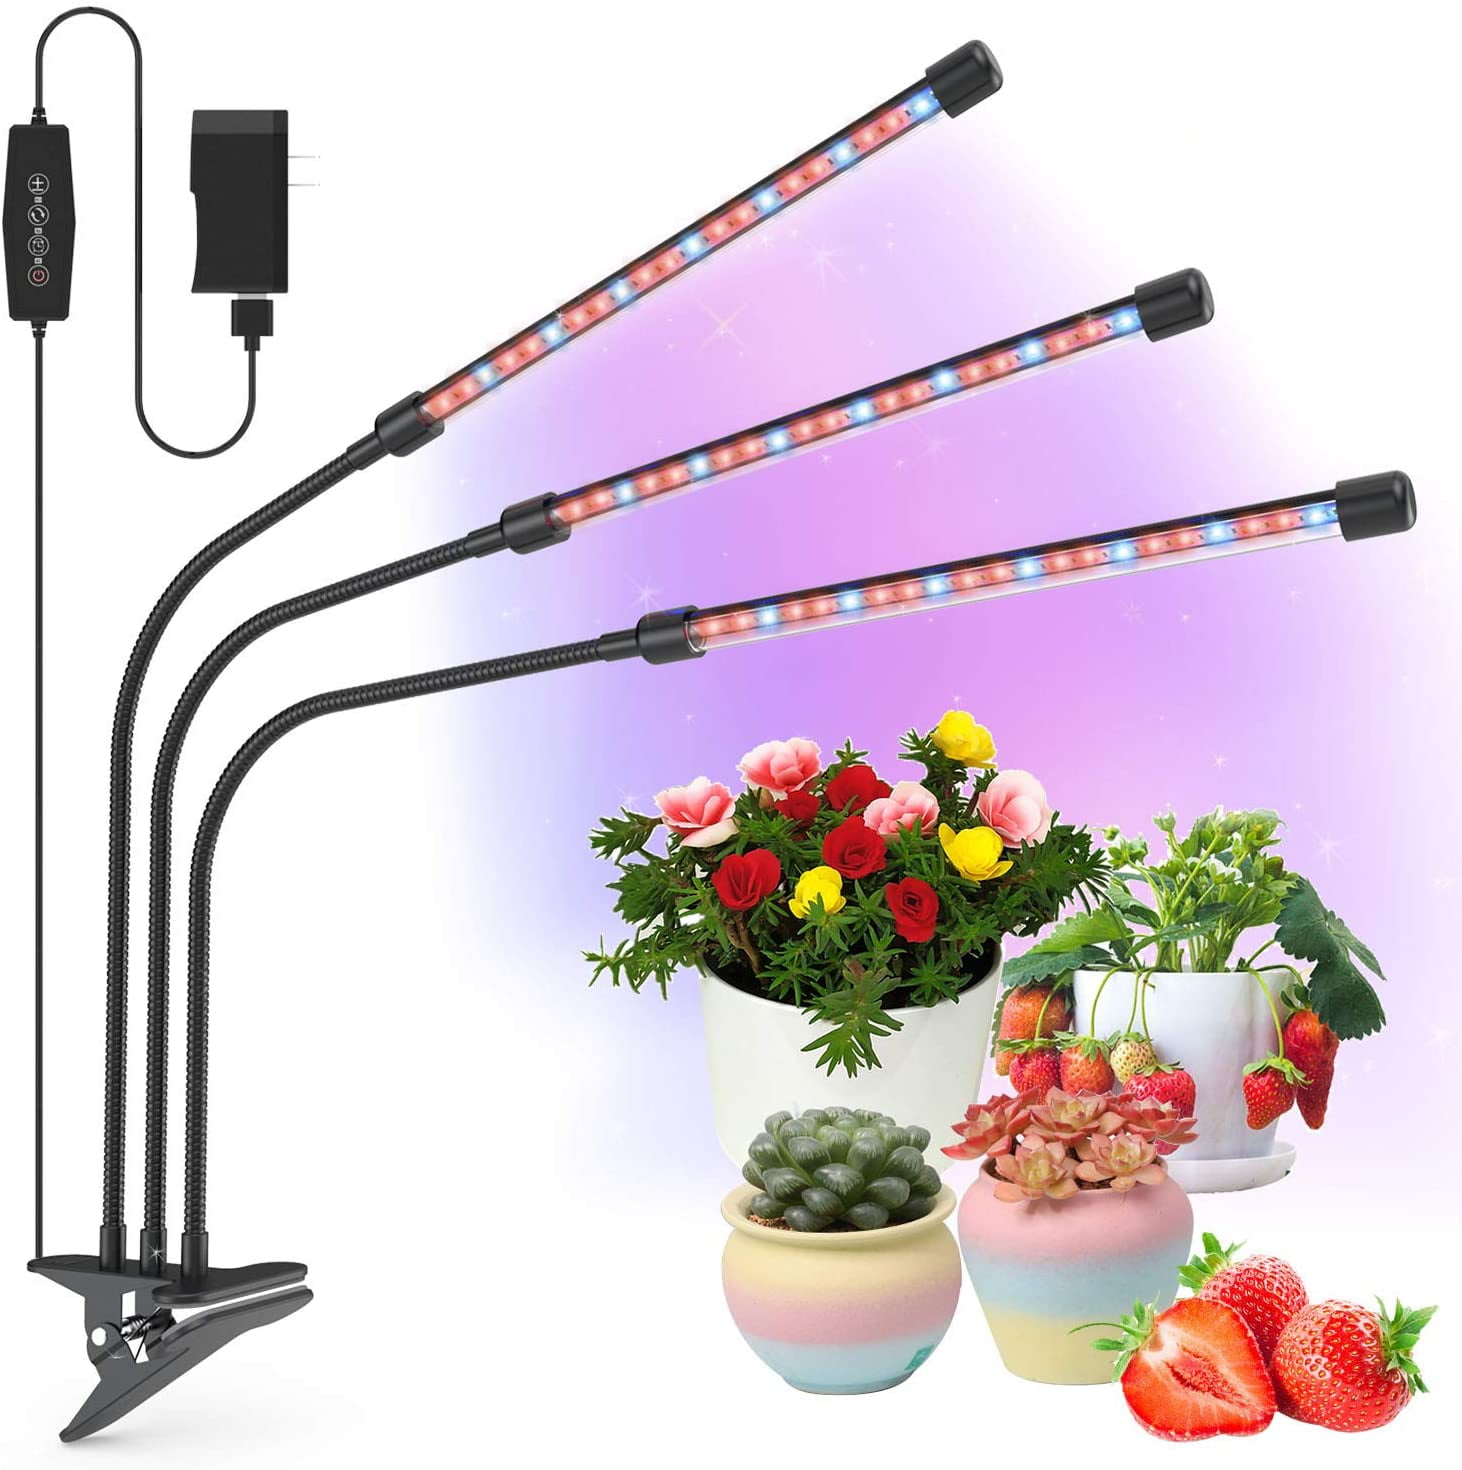 LED Grow Light Plant 4Head Growing Lamp Light for Indoor Plants Hydroponics G6D4 